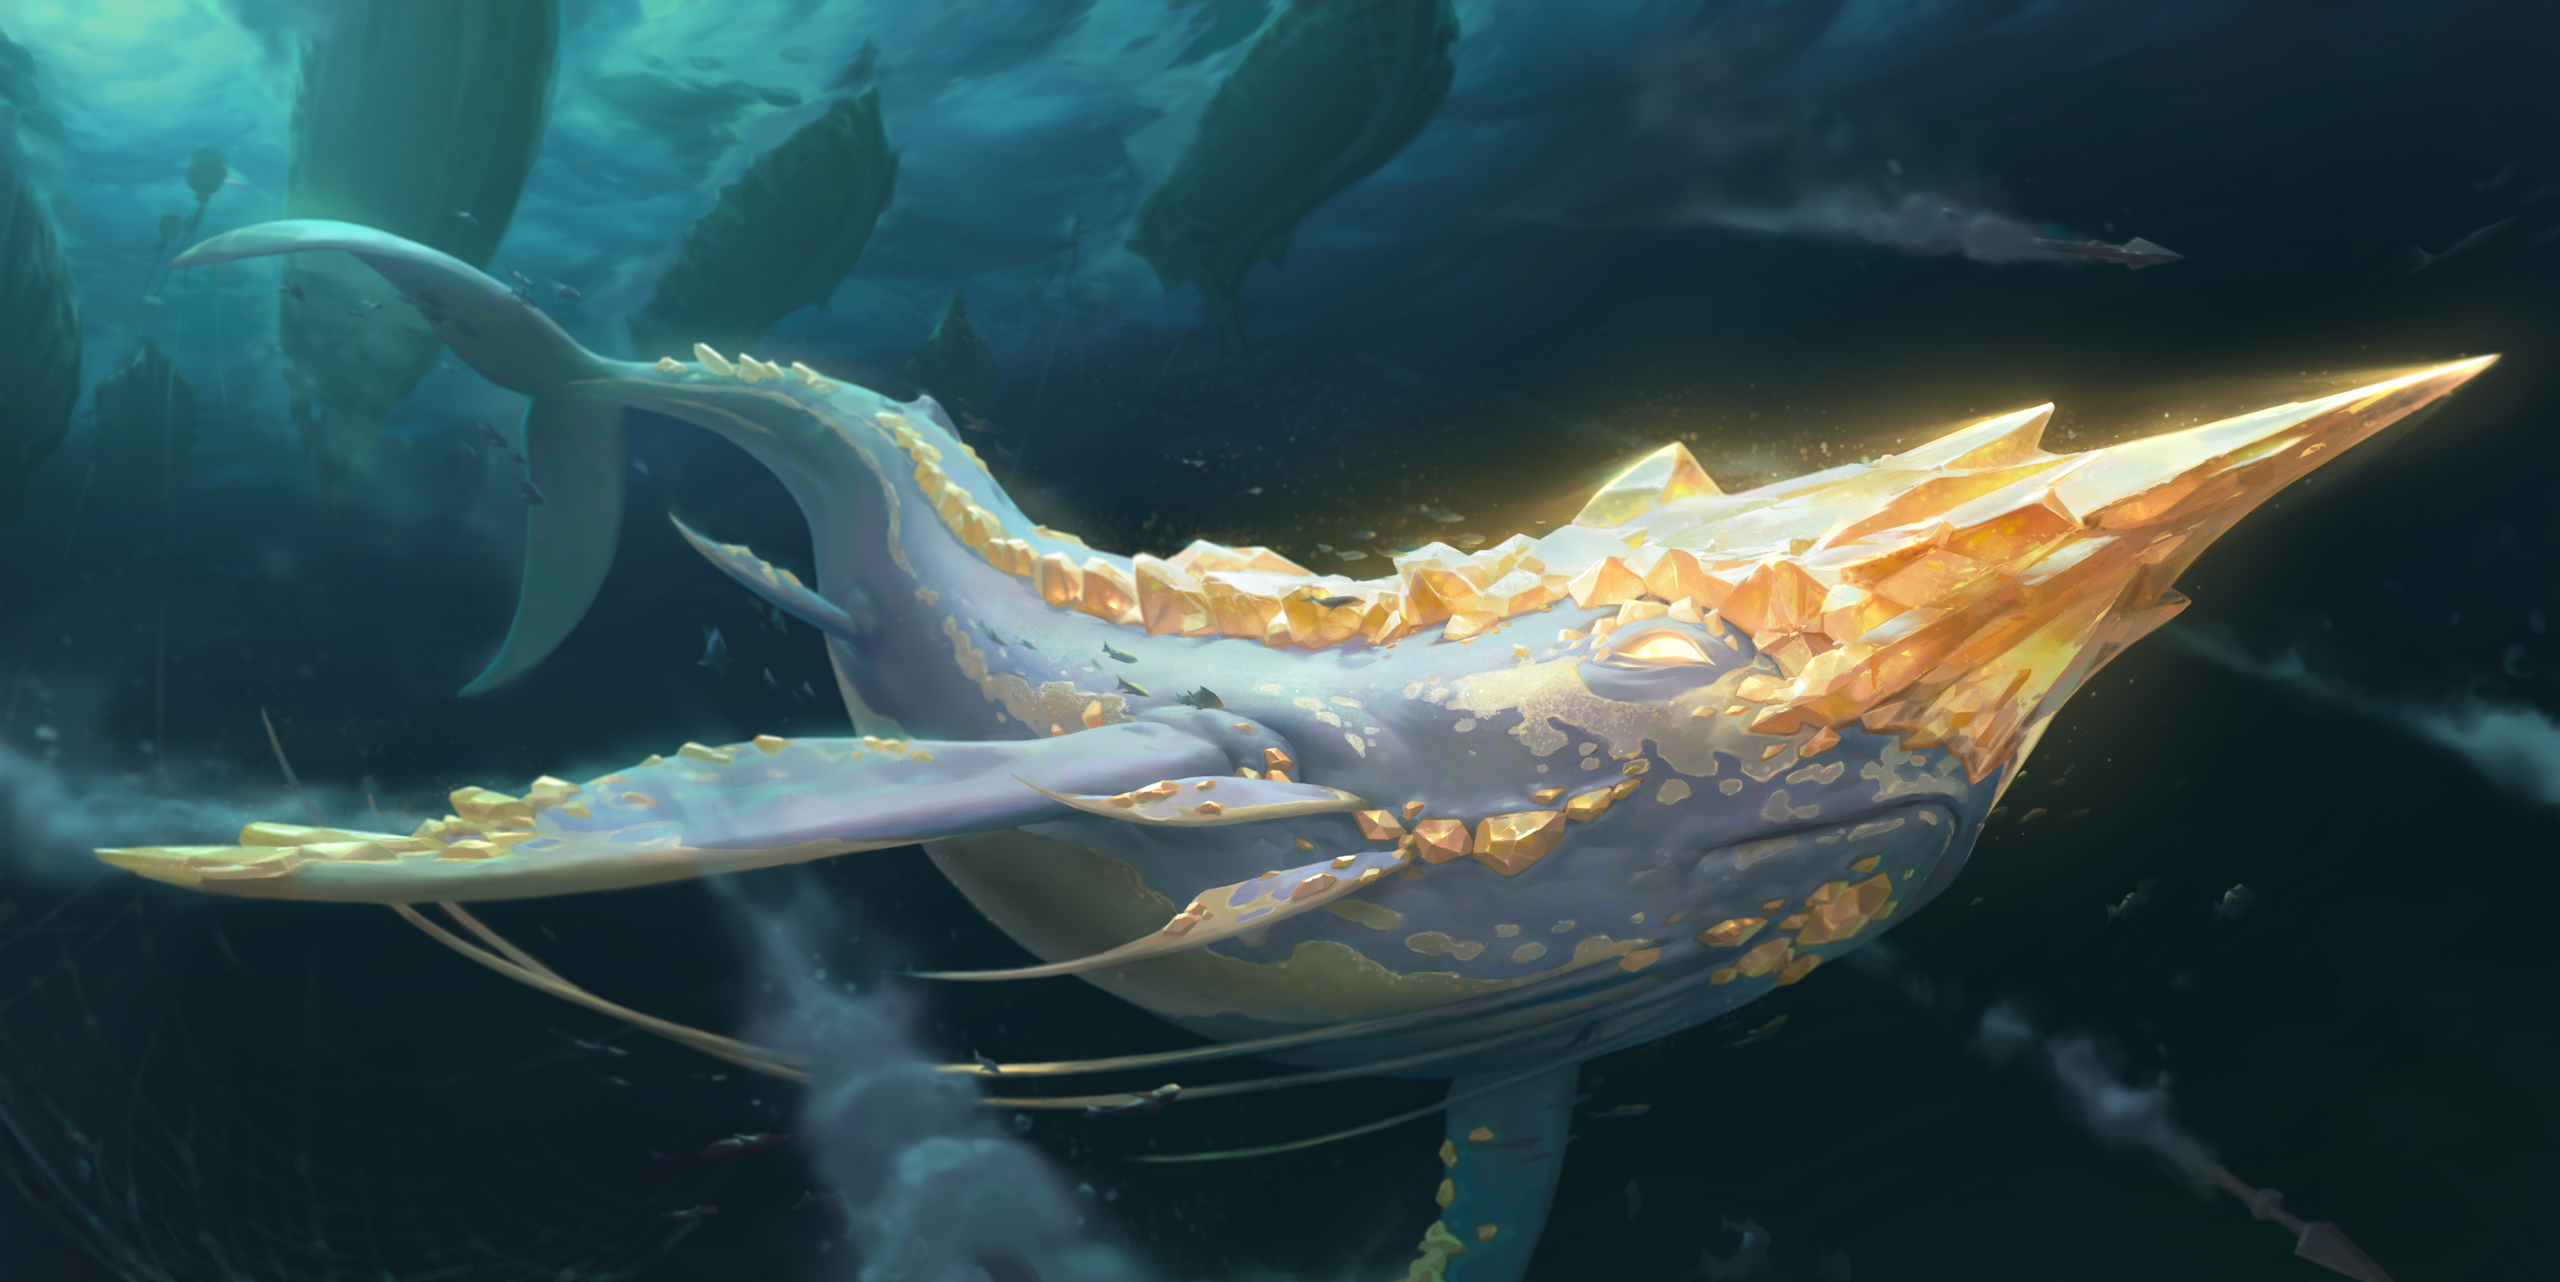 Golden Narwhal by Will Gist